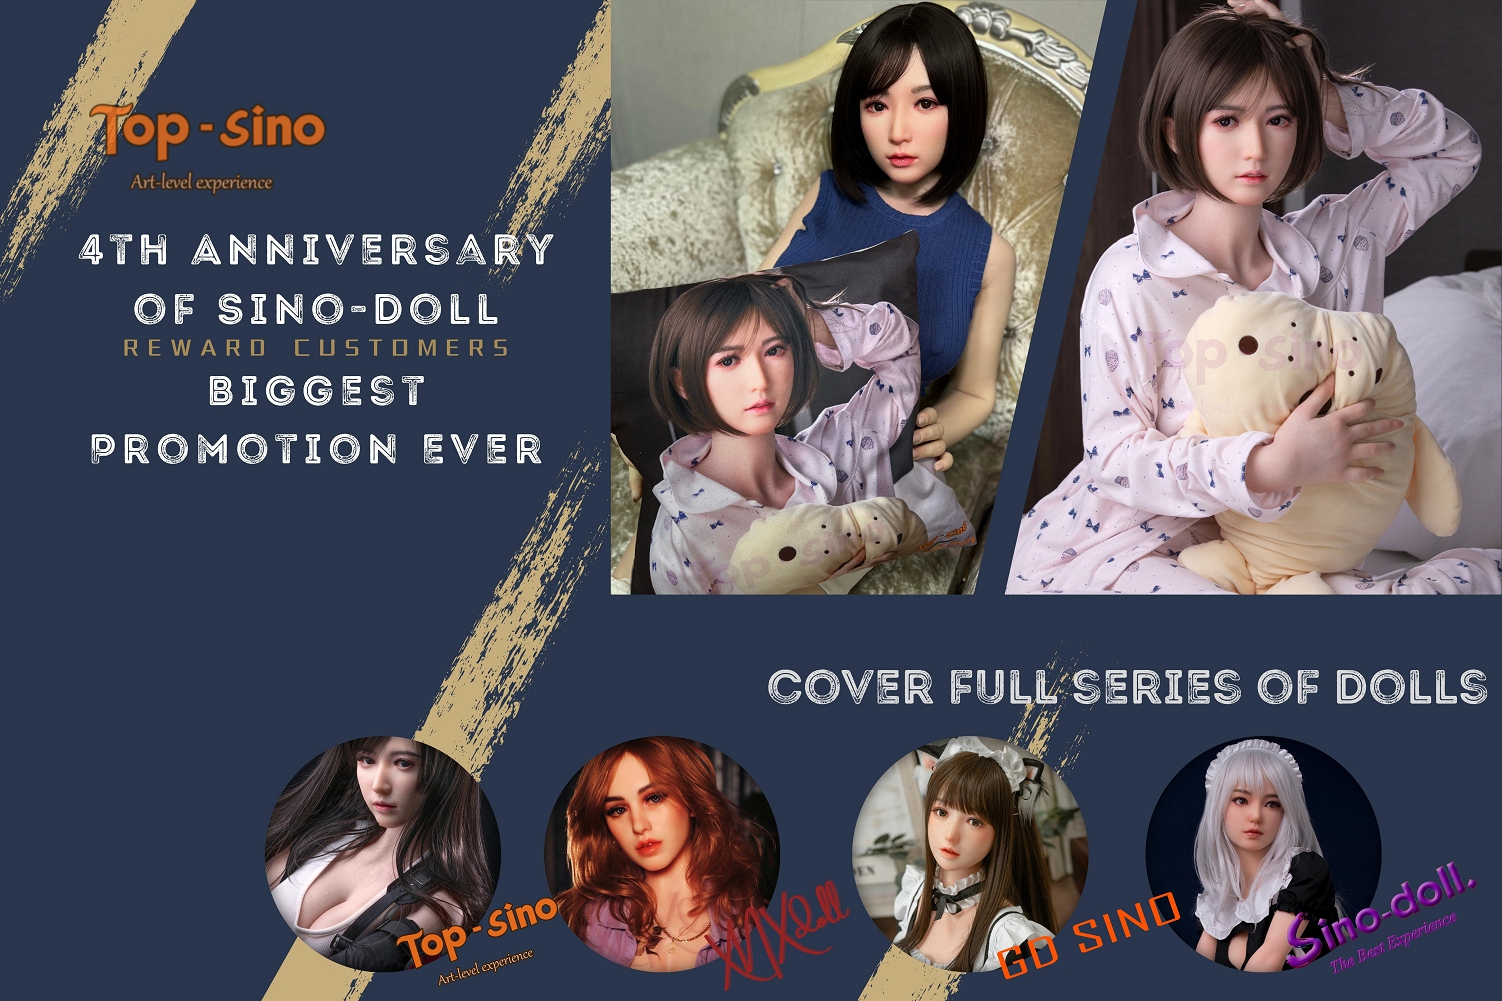 sino-doll 4th anniversary - the biggest promotion ever